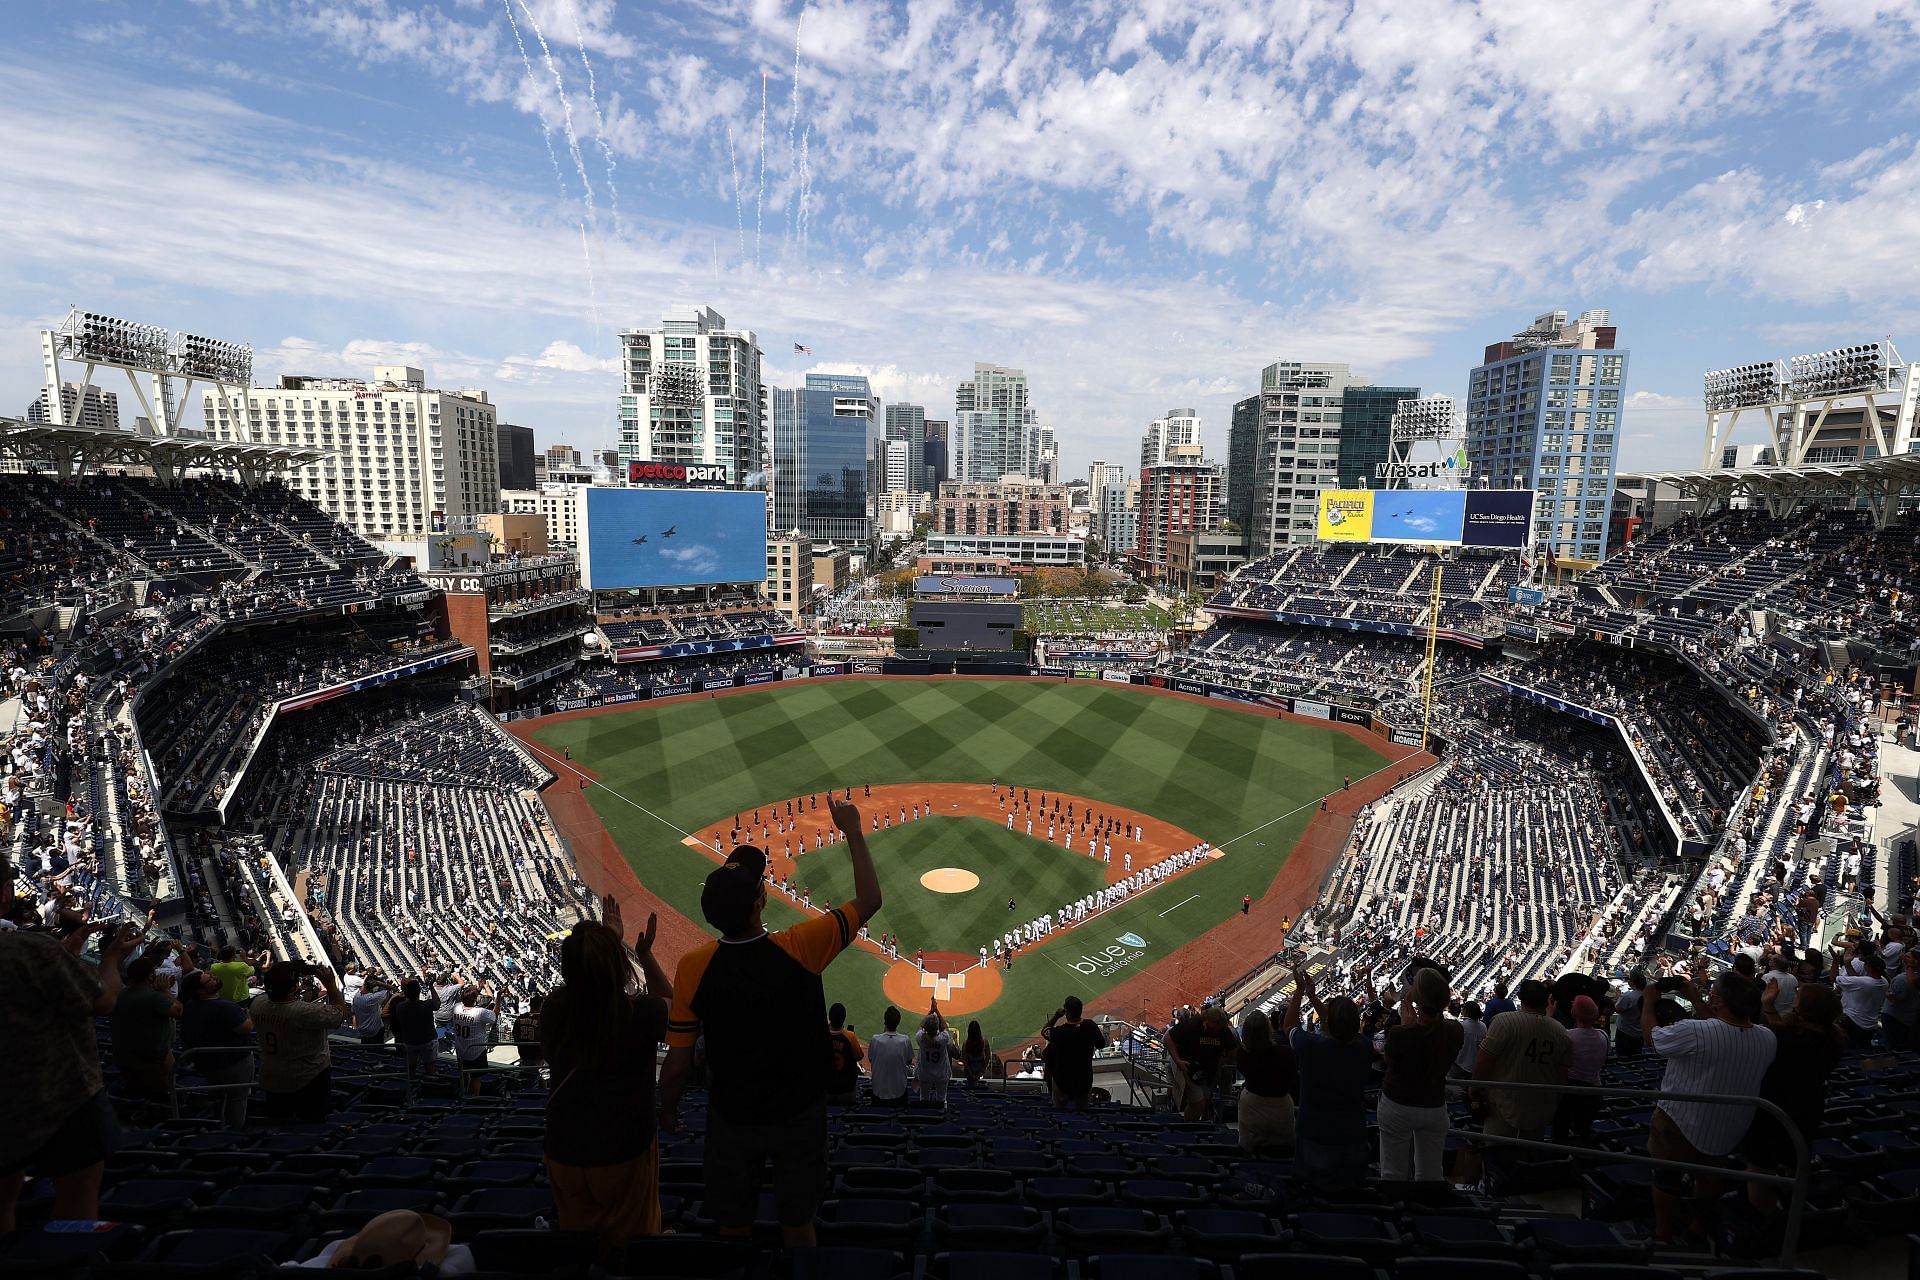 Odds of MLB expansion to Nashville keep increasing – Sightseers' Delight